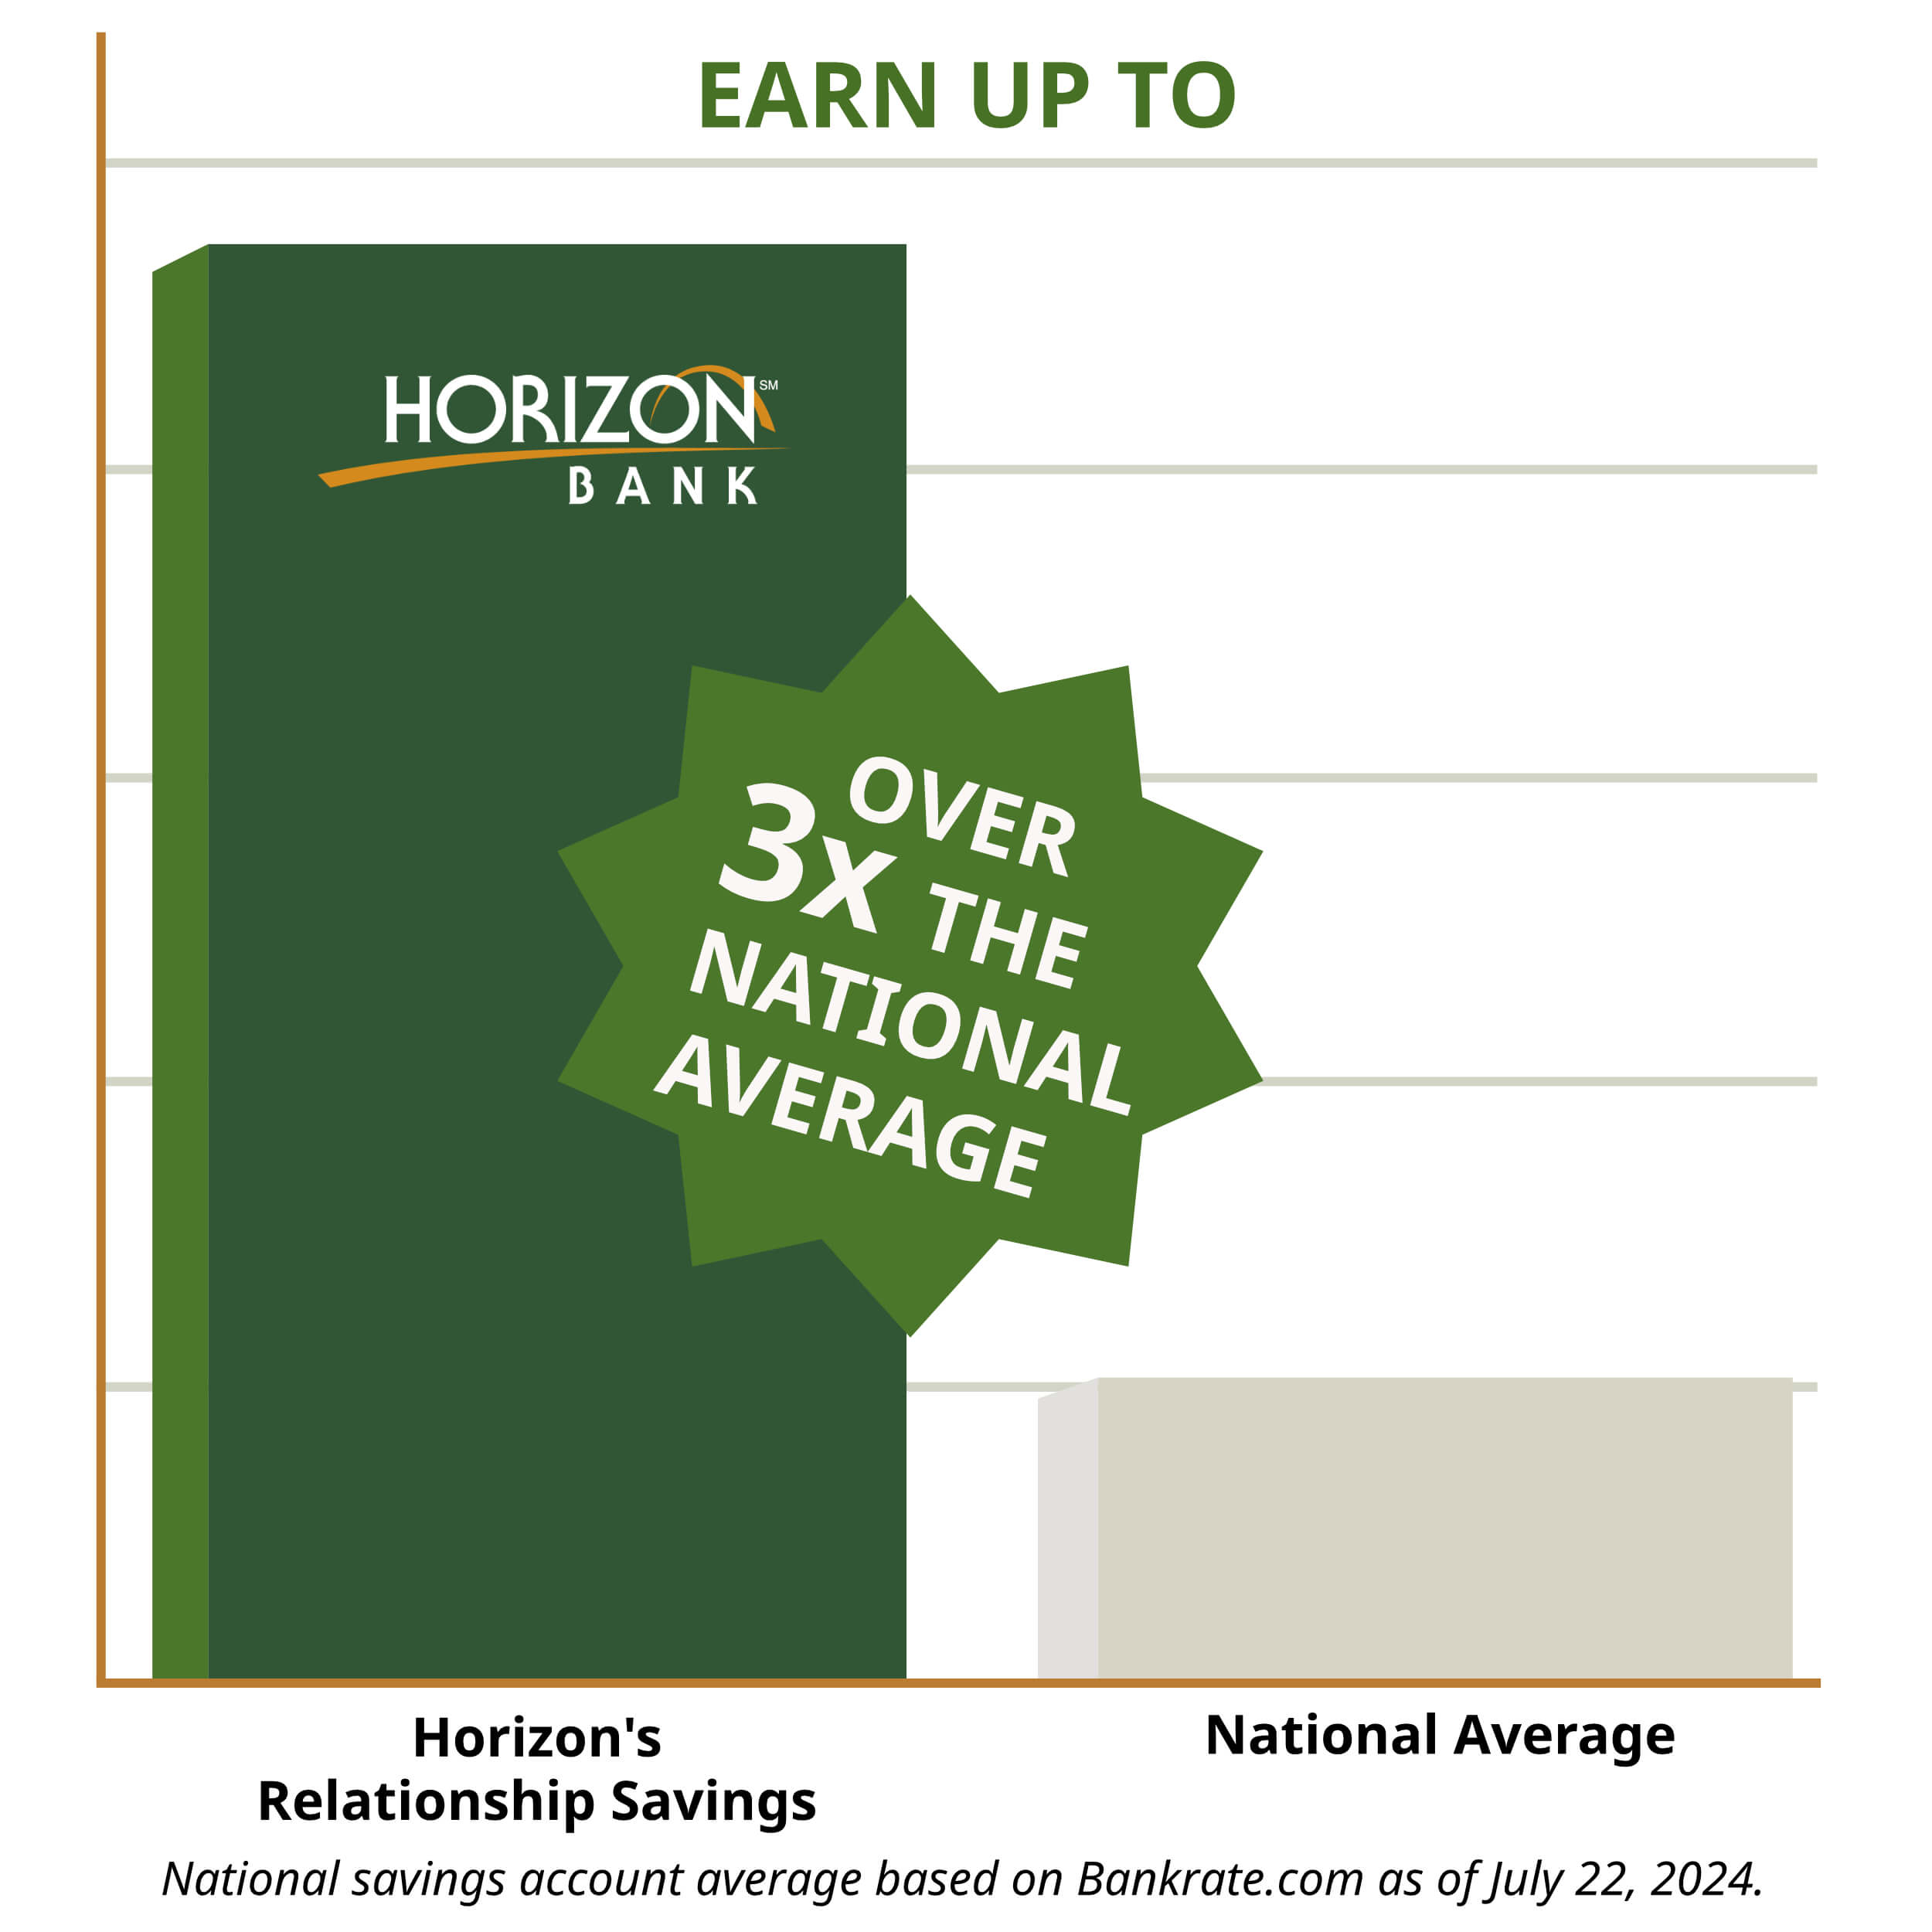 graphic showing 3x national average